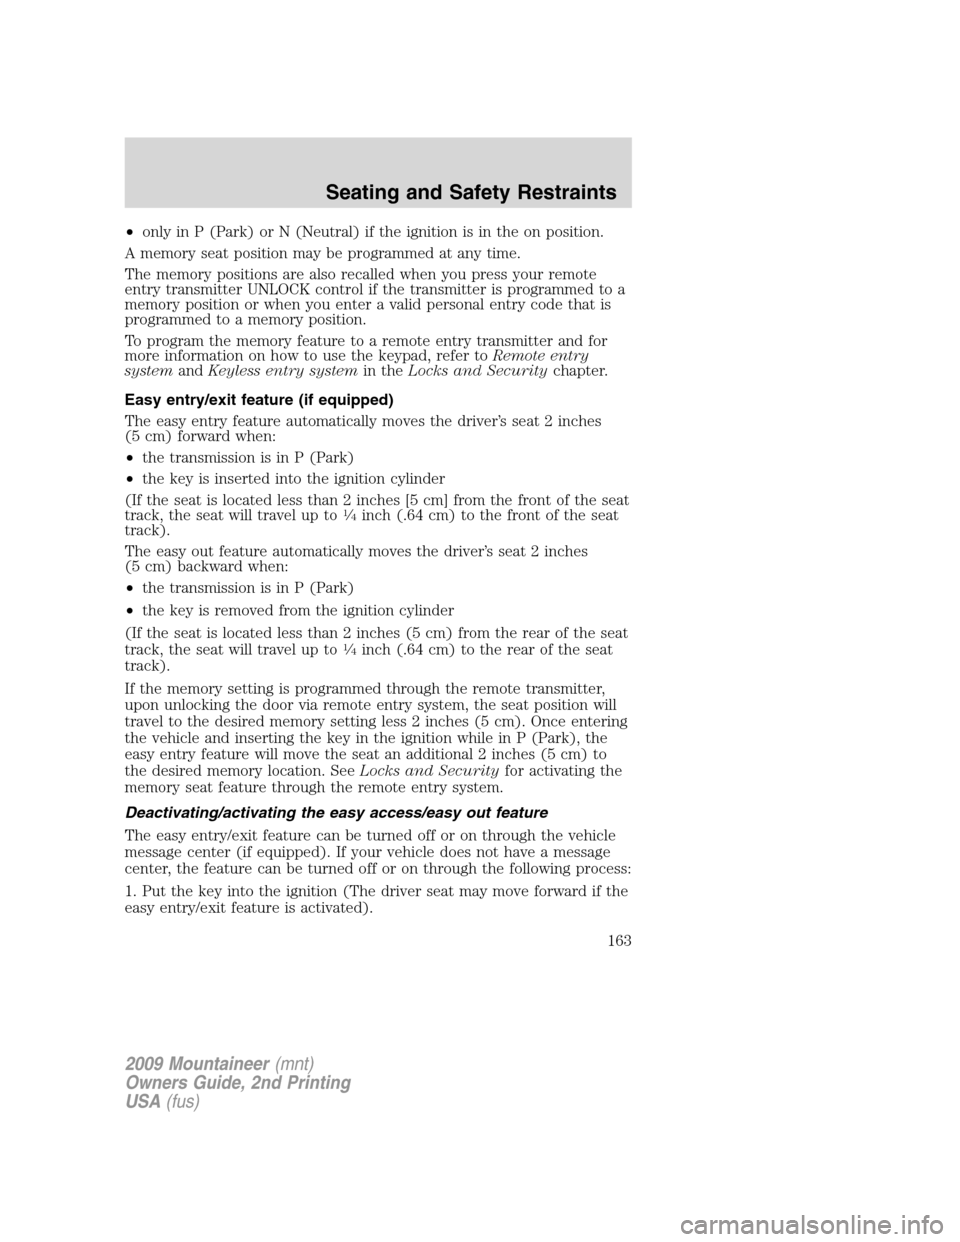 Mercury Mountaineer 2009  Owners Manuals •only in P (Park) or N (Neutral) if the ignition is in the on position.
A memory seat position may be programmed at any time.
The memory positions are also recalled when you press your remote
entry 